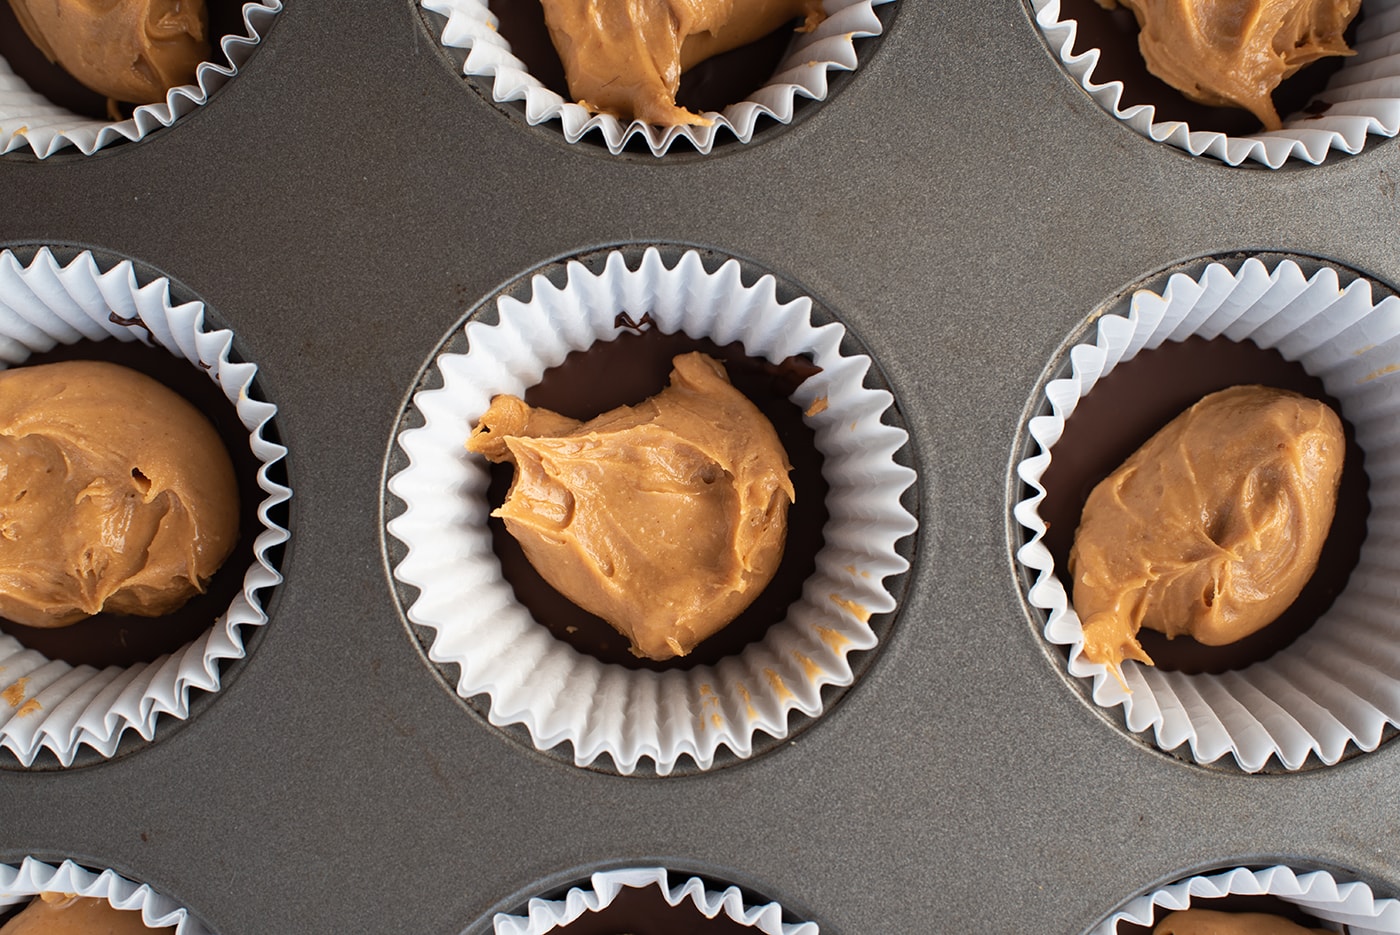 Homemade Reese's Peanut Butter Cups Recipe